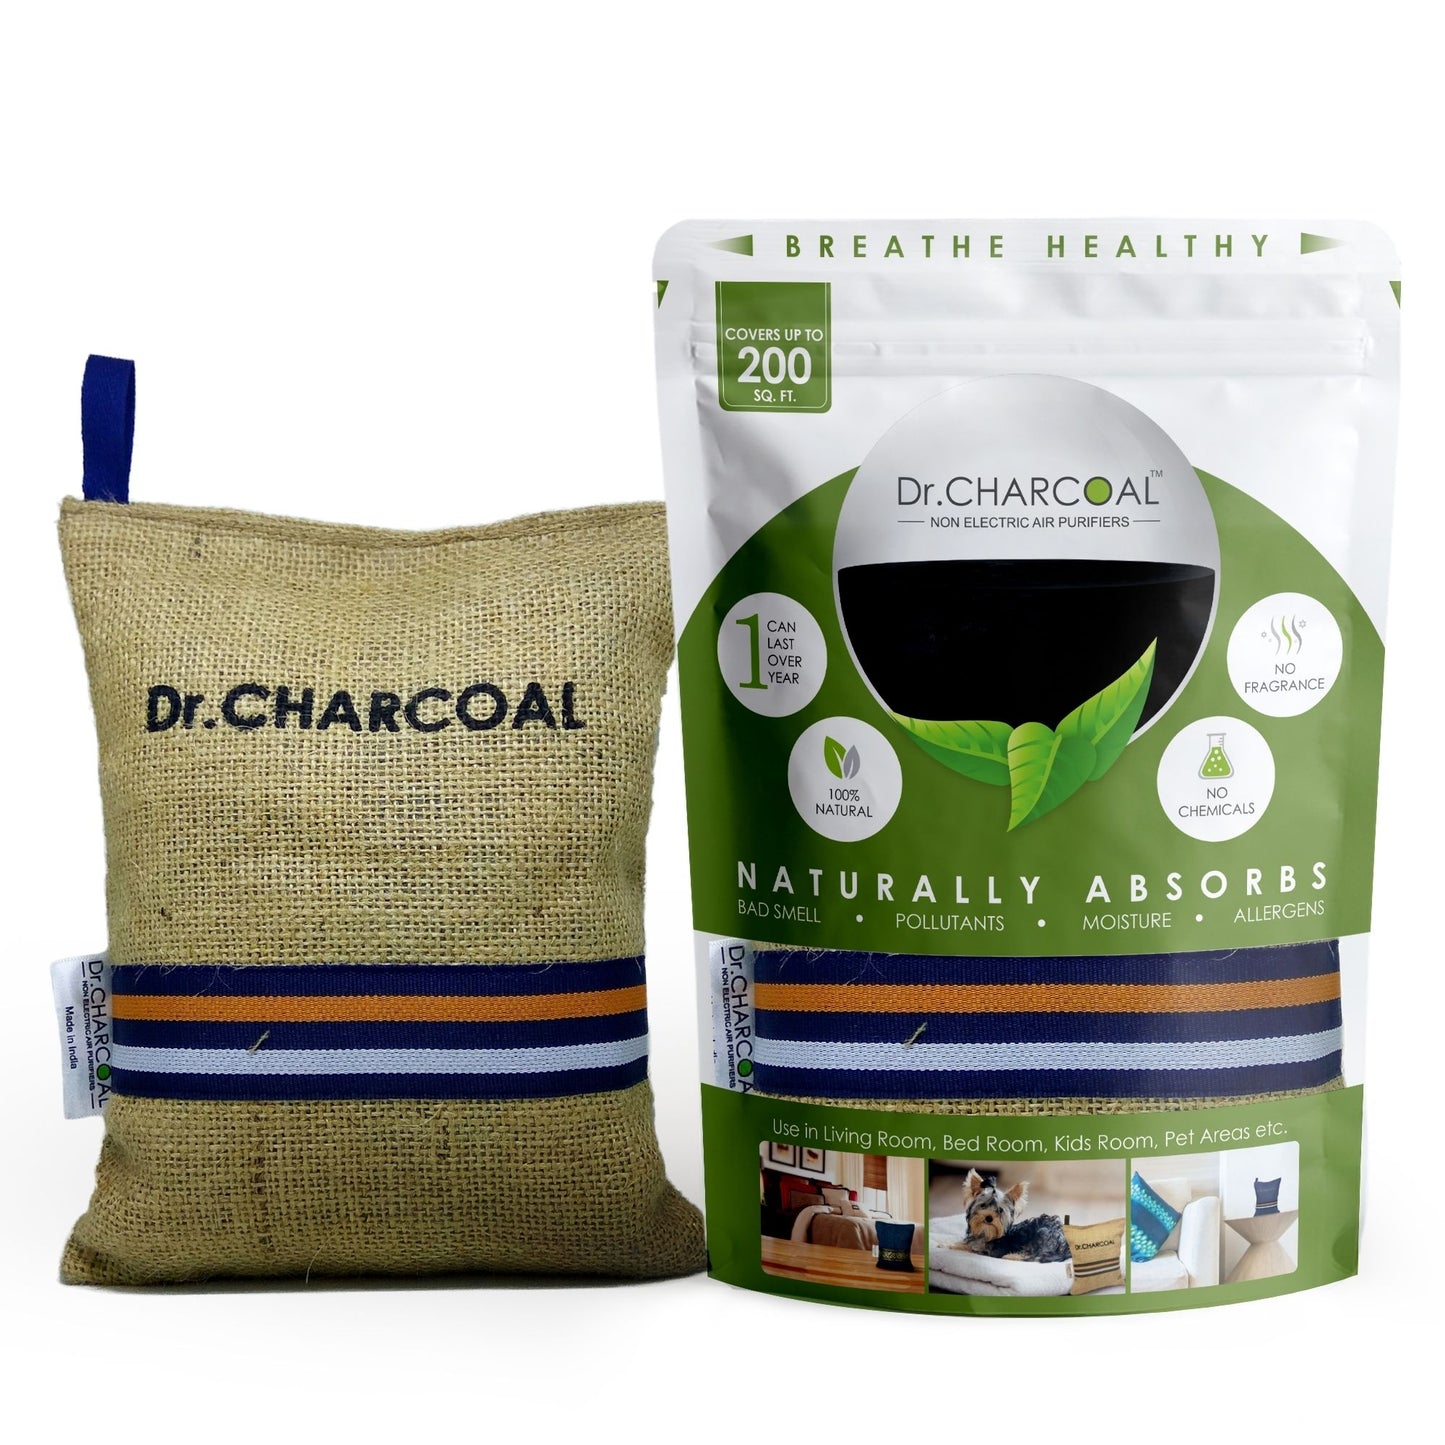 Dr. CHARCOAL Air Purifier Bags to Deodorize and Dehumidify  Living Room, Bedroom, Pet Areas (500g)